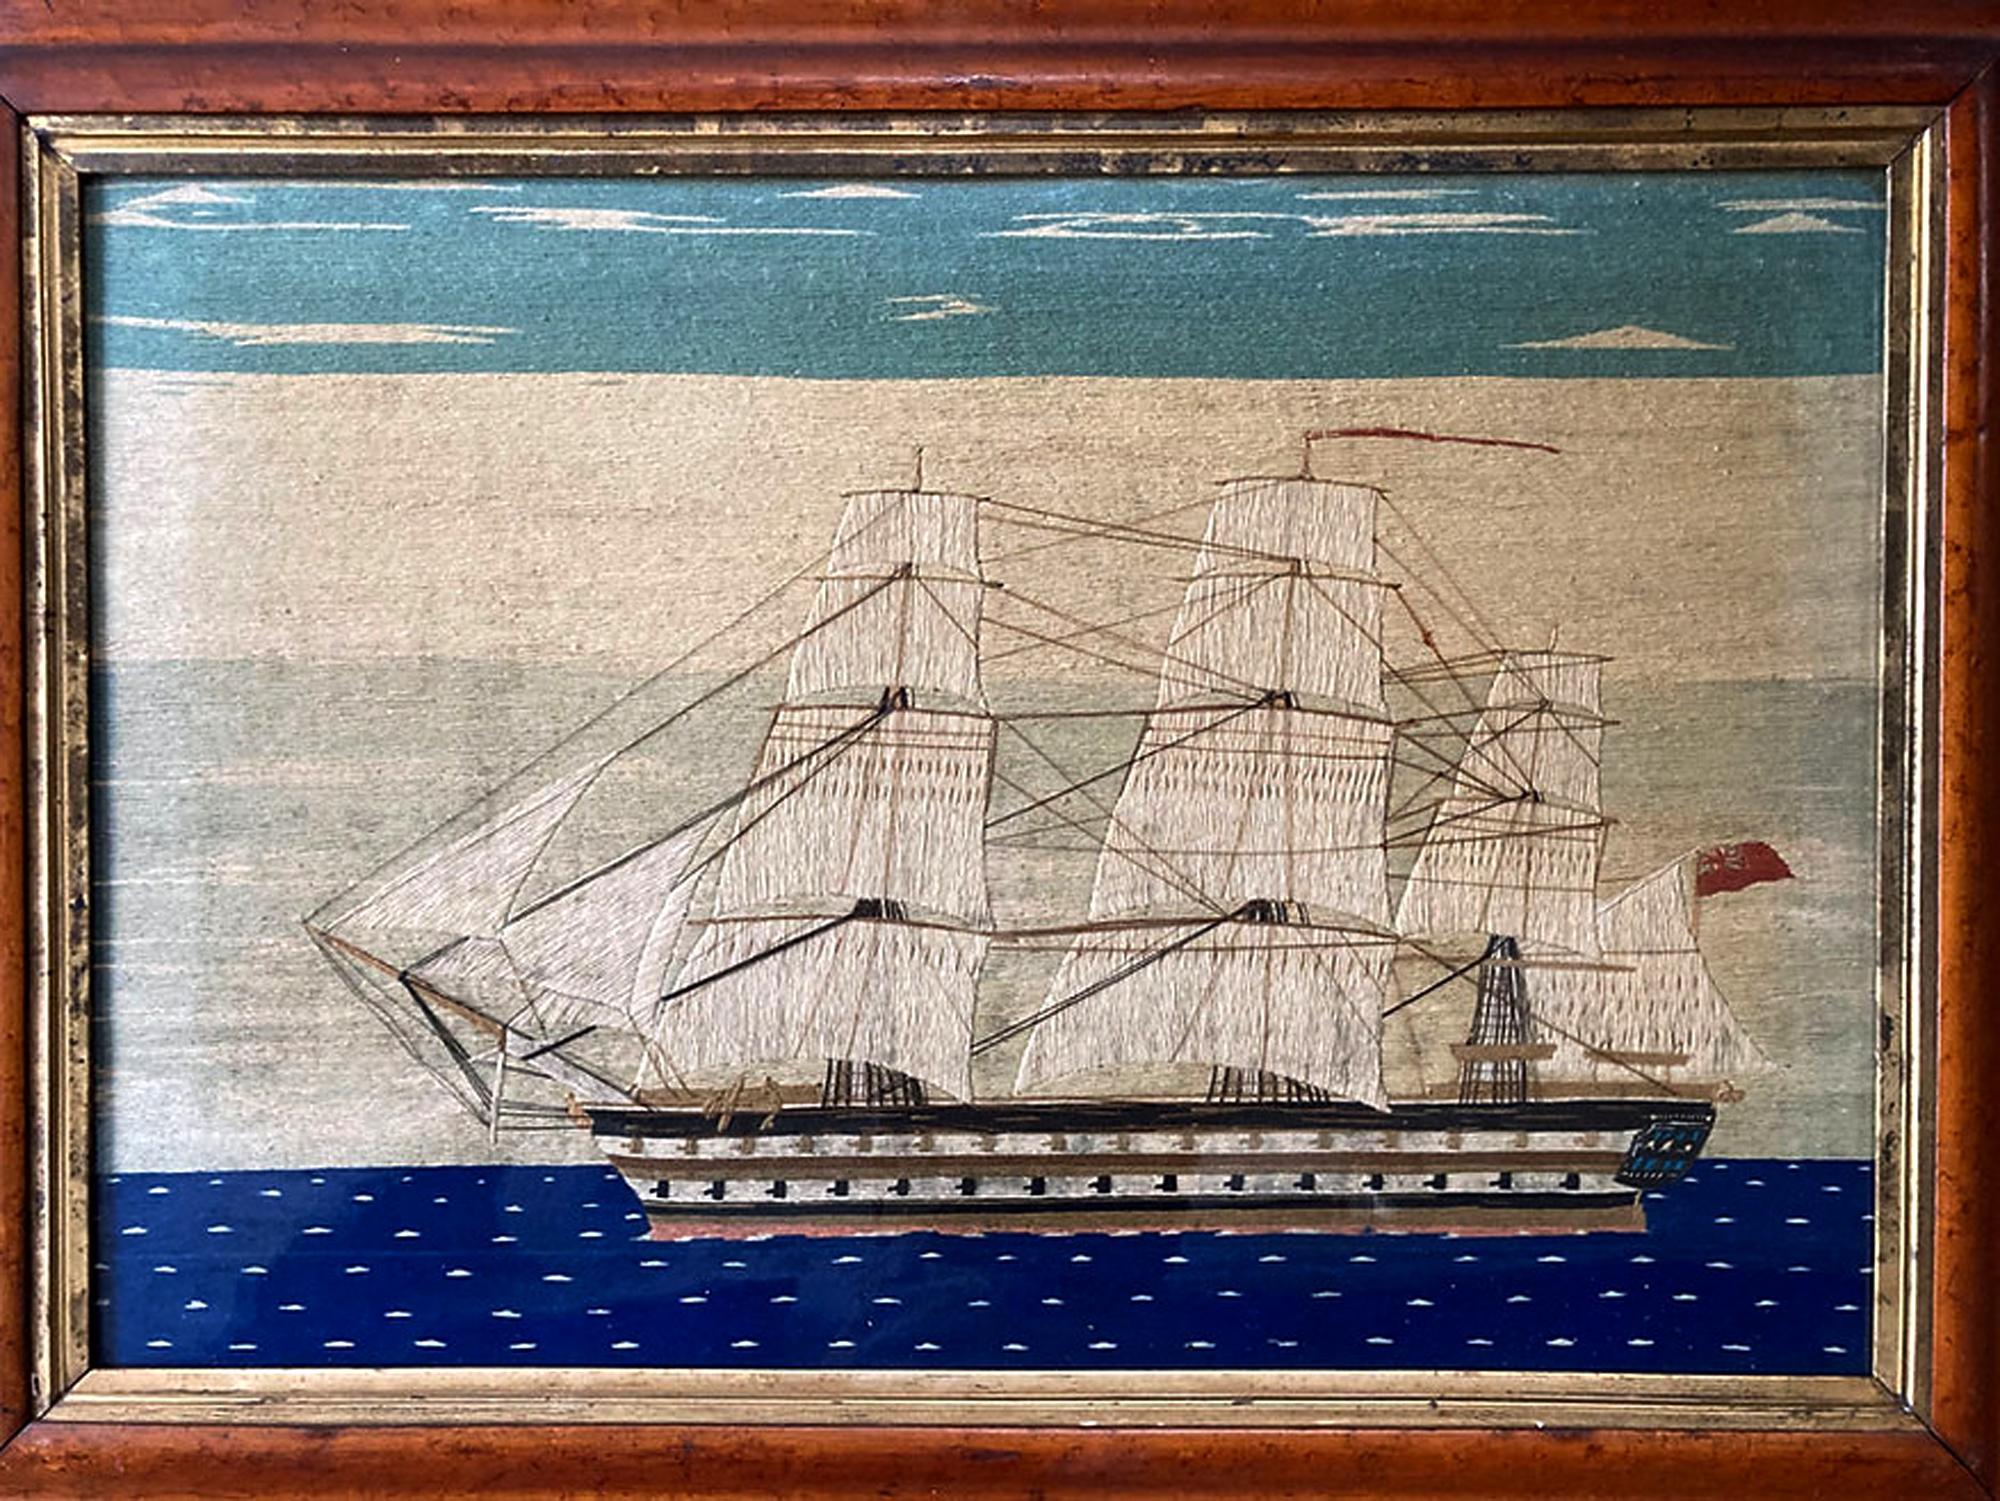 British Sailor's large woolwork of HMS Brunswick,
Circa 1865

The large sailor's woolwork depicts an image of a Royal Navy Second Rate Battleship. By repute she is the HMS Brunswick launched in June 1855 with eighty guns, screw propulsion and a crew